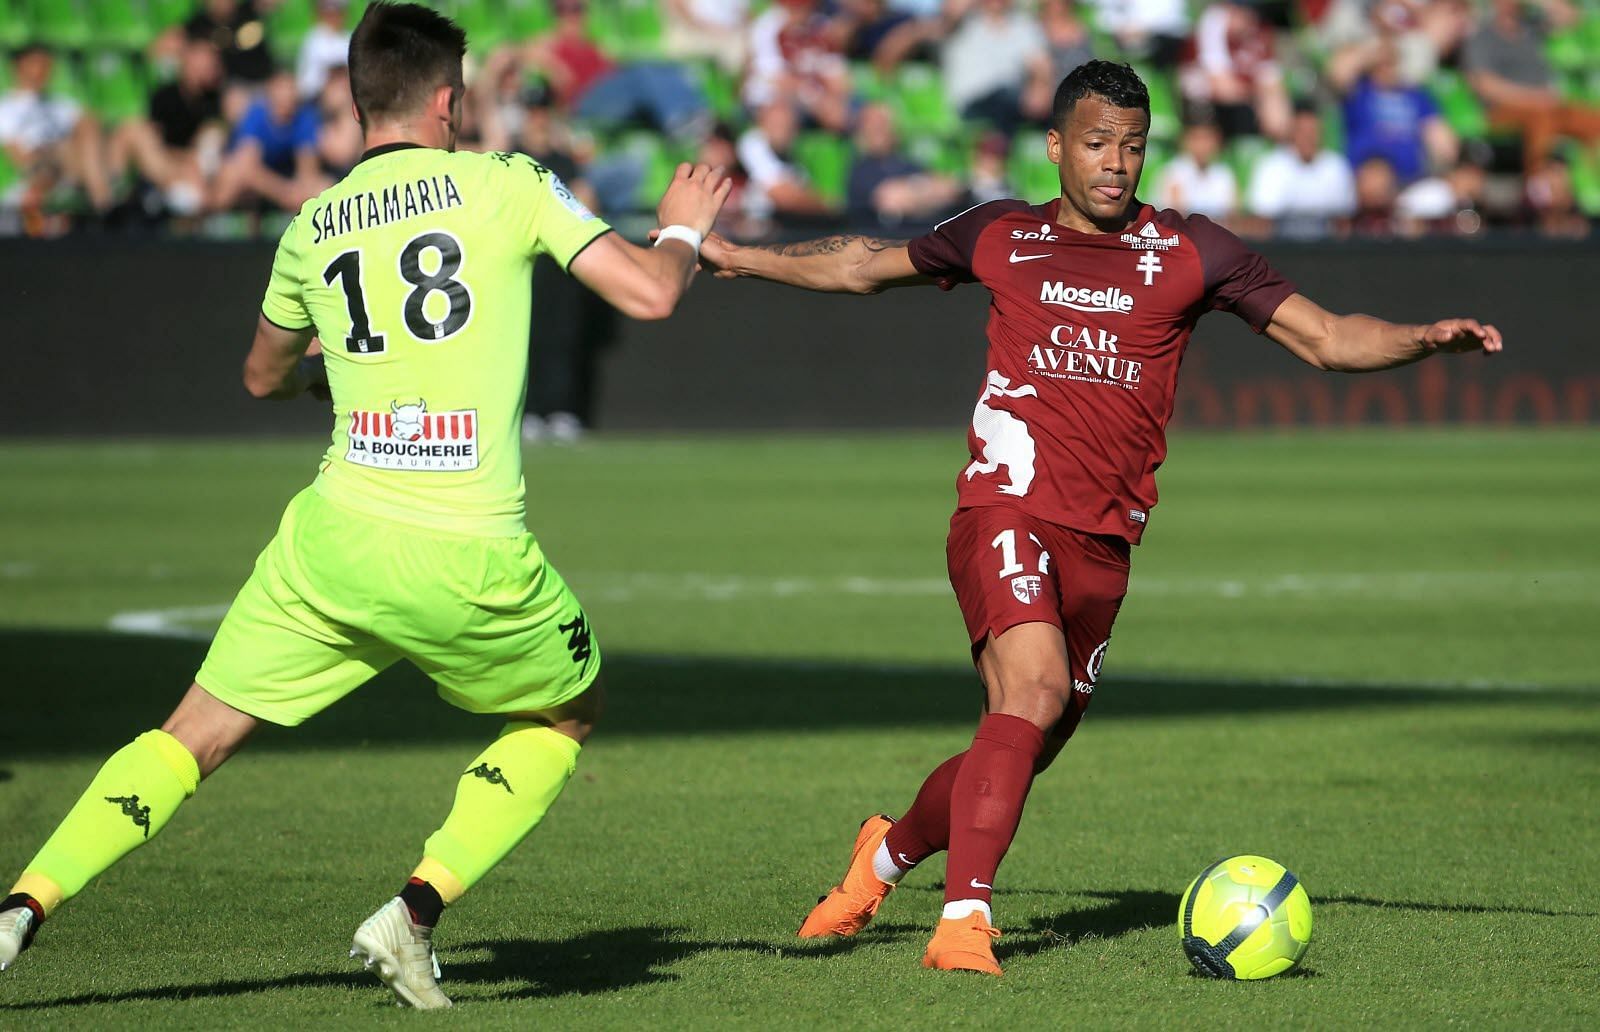 Metz and Angers square off in their Ligue 1 fixture on Saturday